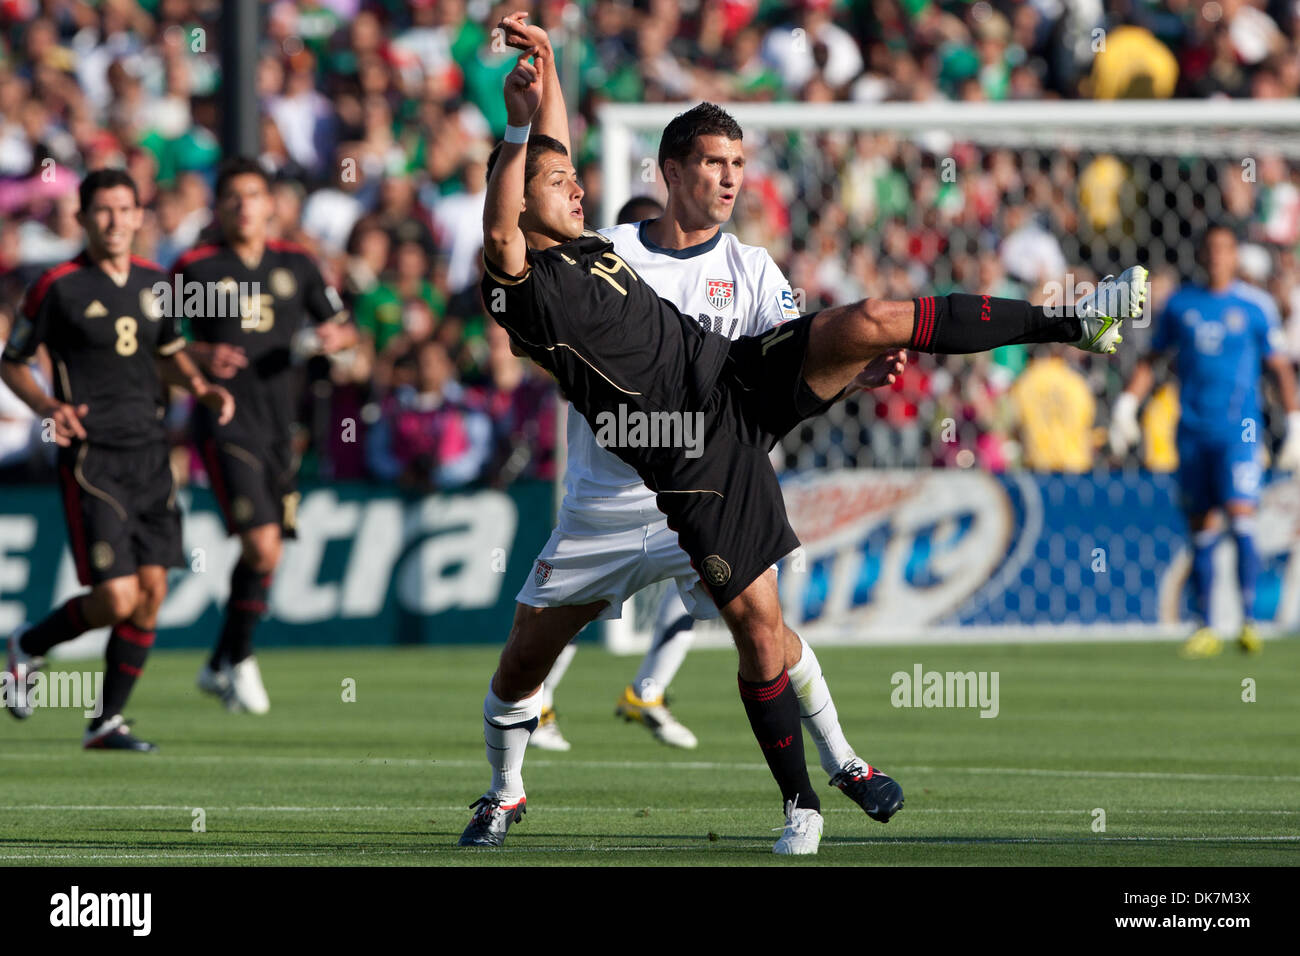 June 25, 2011 - Pasadena, California, U.S - Mexico forward Javier ''Chicharito'' Hernandez #14 and United States defender Eric Lichaj #14 in action during the 2011 CONCACAF Gold Cup championship game between United States and Mexico at a sold out Rose Bowl. Mexico went on to defeat United States with a final score of 4-2. (Credit Image: © Brandon Parry/Southcreek Global/ZUMAPRESS.c Stock Photo